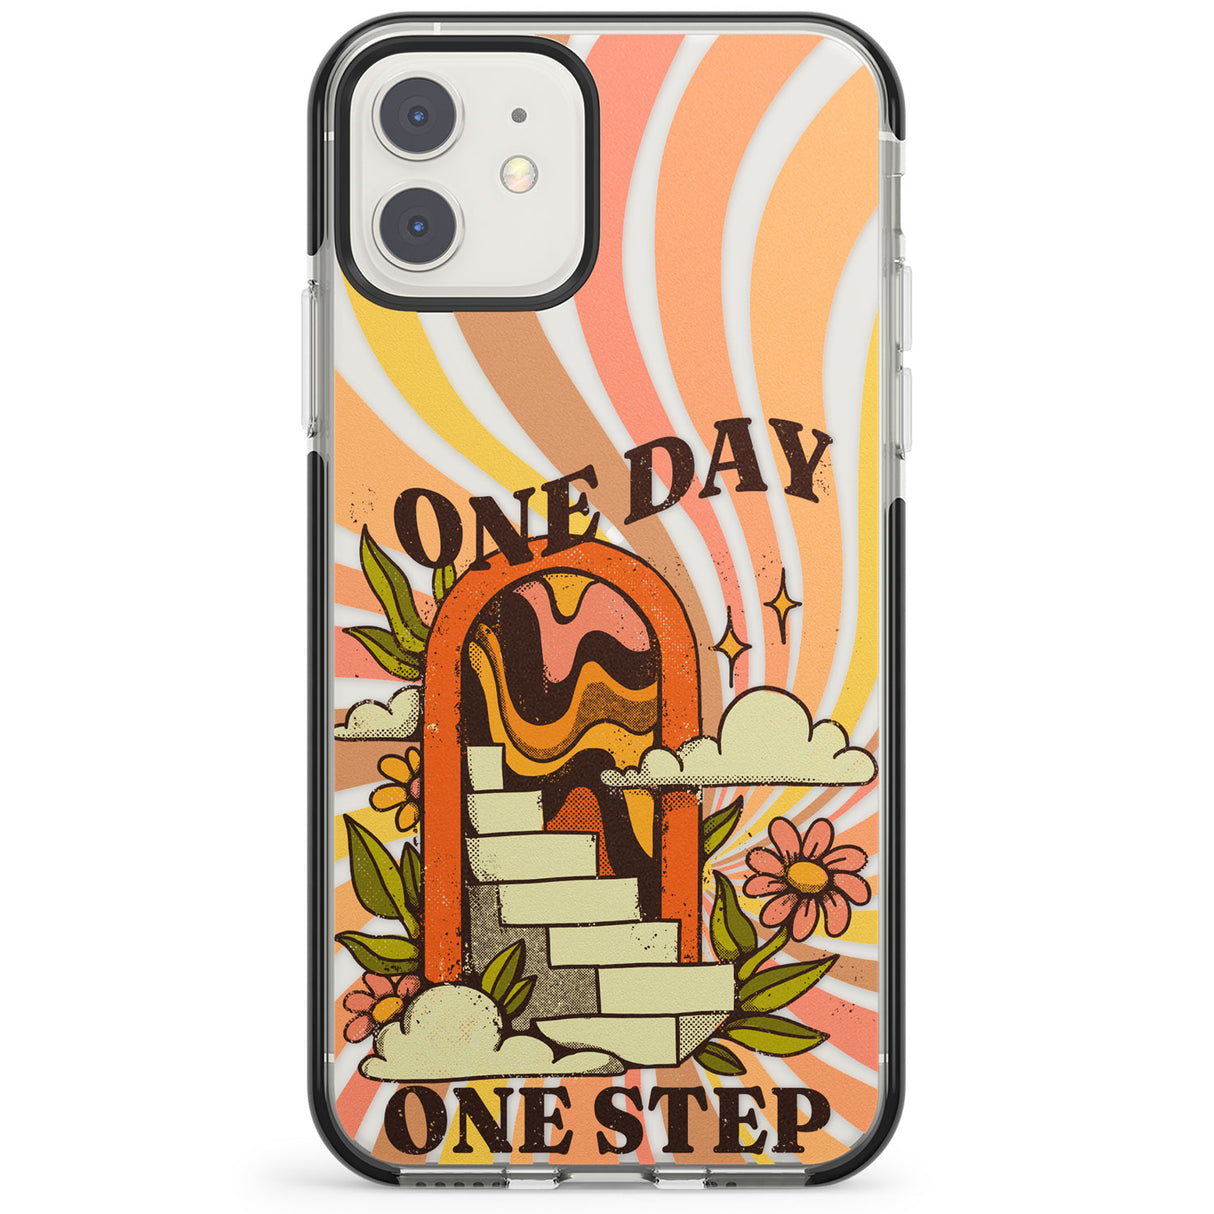 One Day One Step Impact Phone Case for iPhone 11, iphone 12